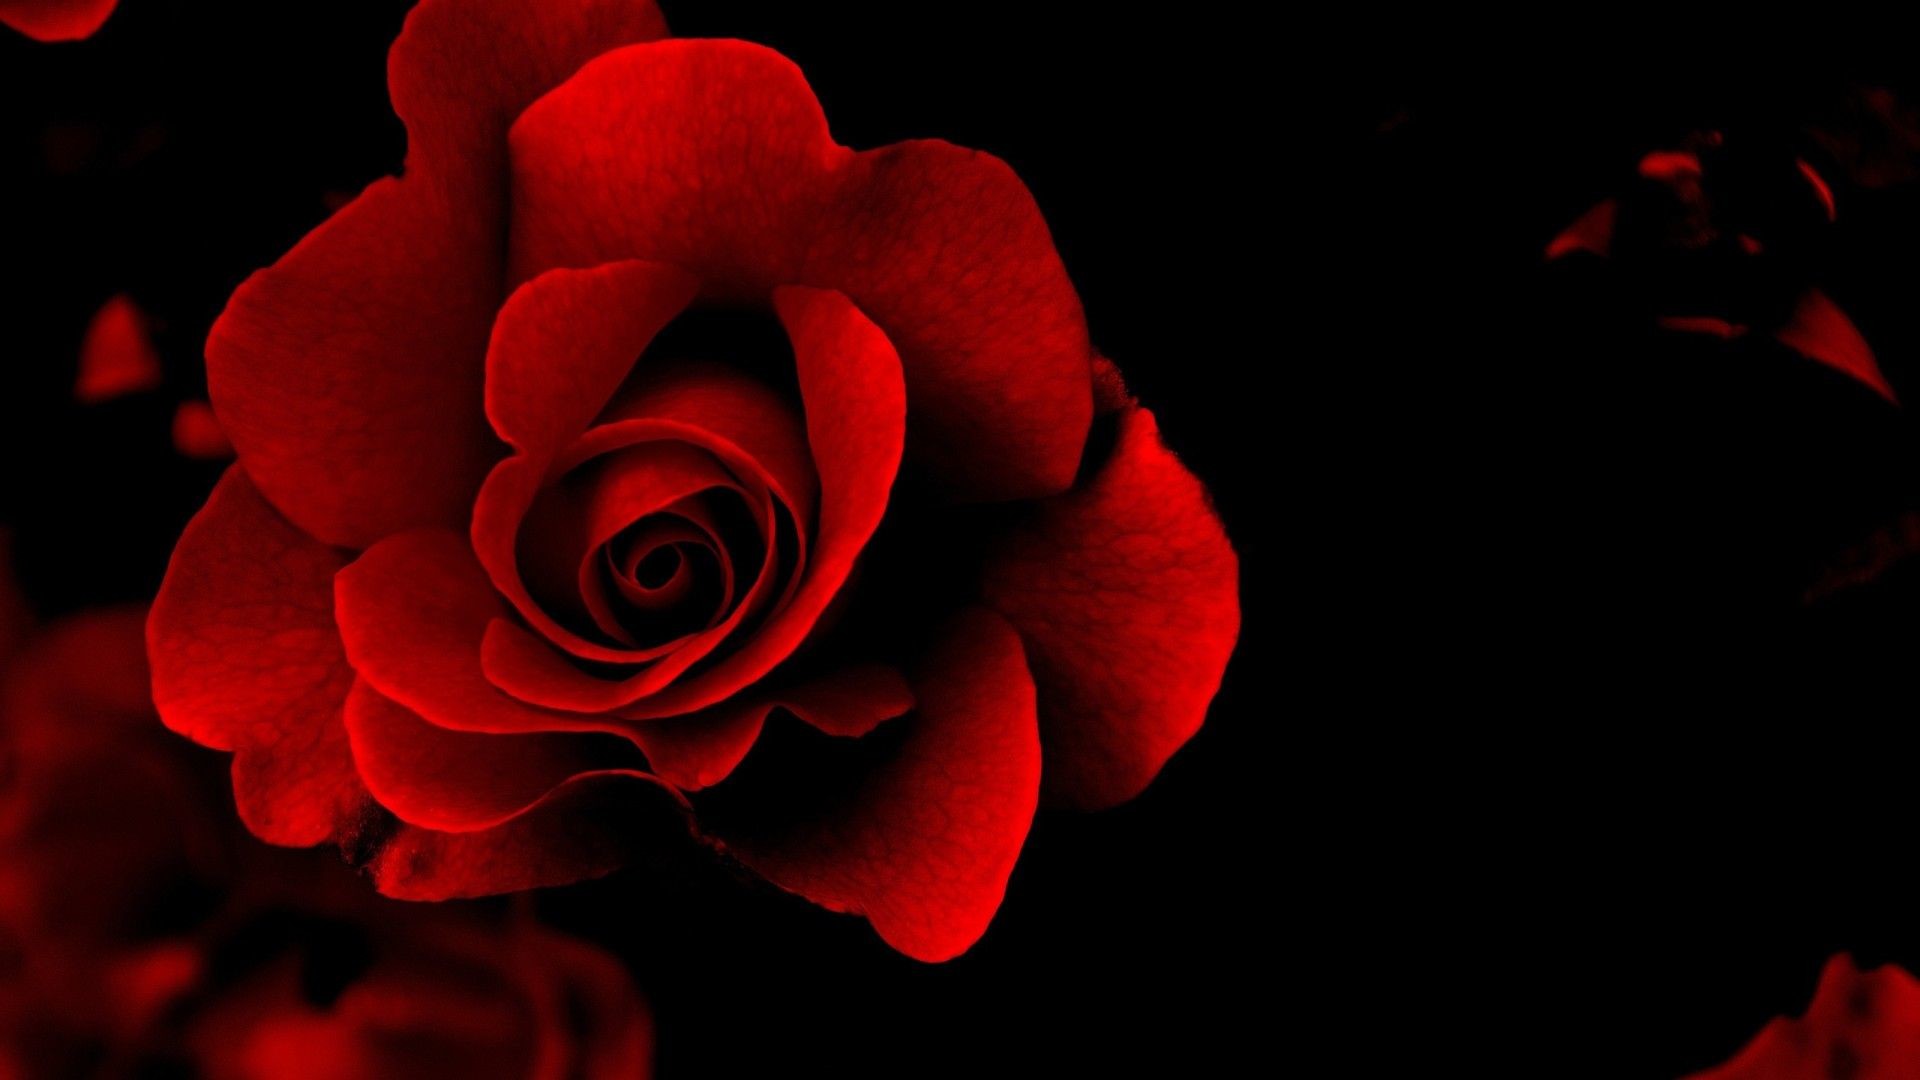 1920x1080 Red Flower HD wallpapers in high quality and additional high resolution  Full HD Red Flower wallpapers for desktop, Android and iOS.